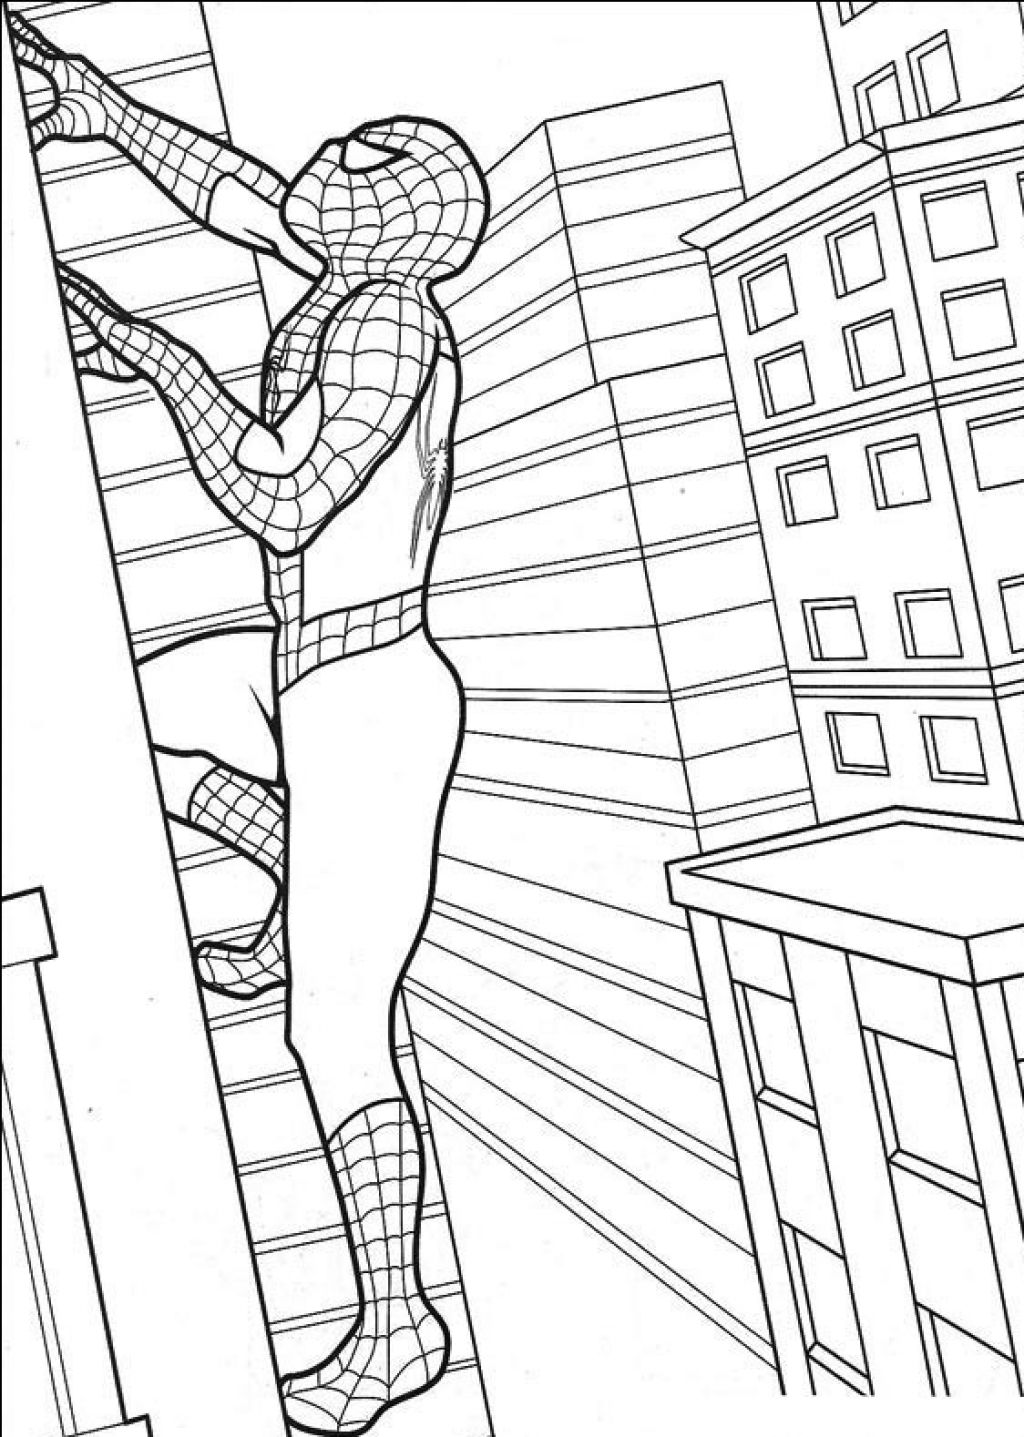 Free Printable Spiderman Coloring Pages For Kids Coloring Wallpapers Download Free Images Wallpaper [coloring365.blogspot.com]